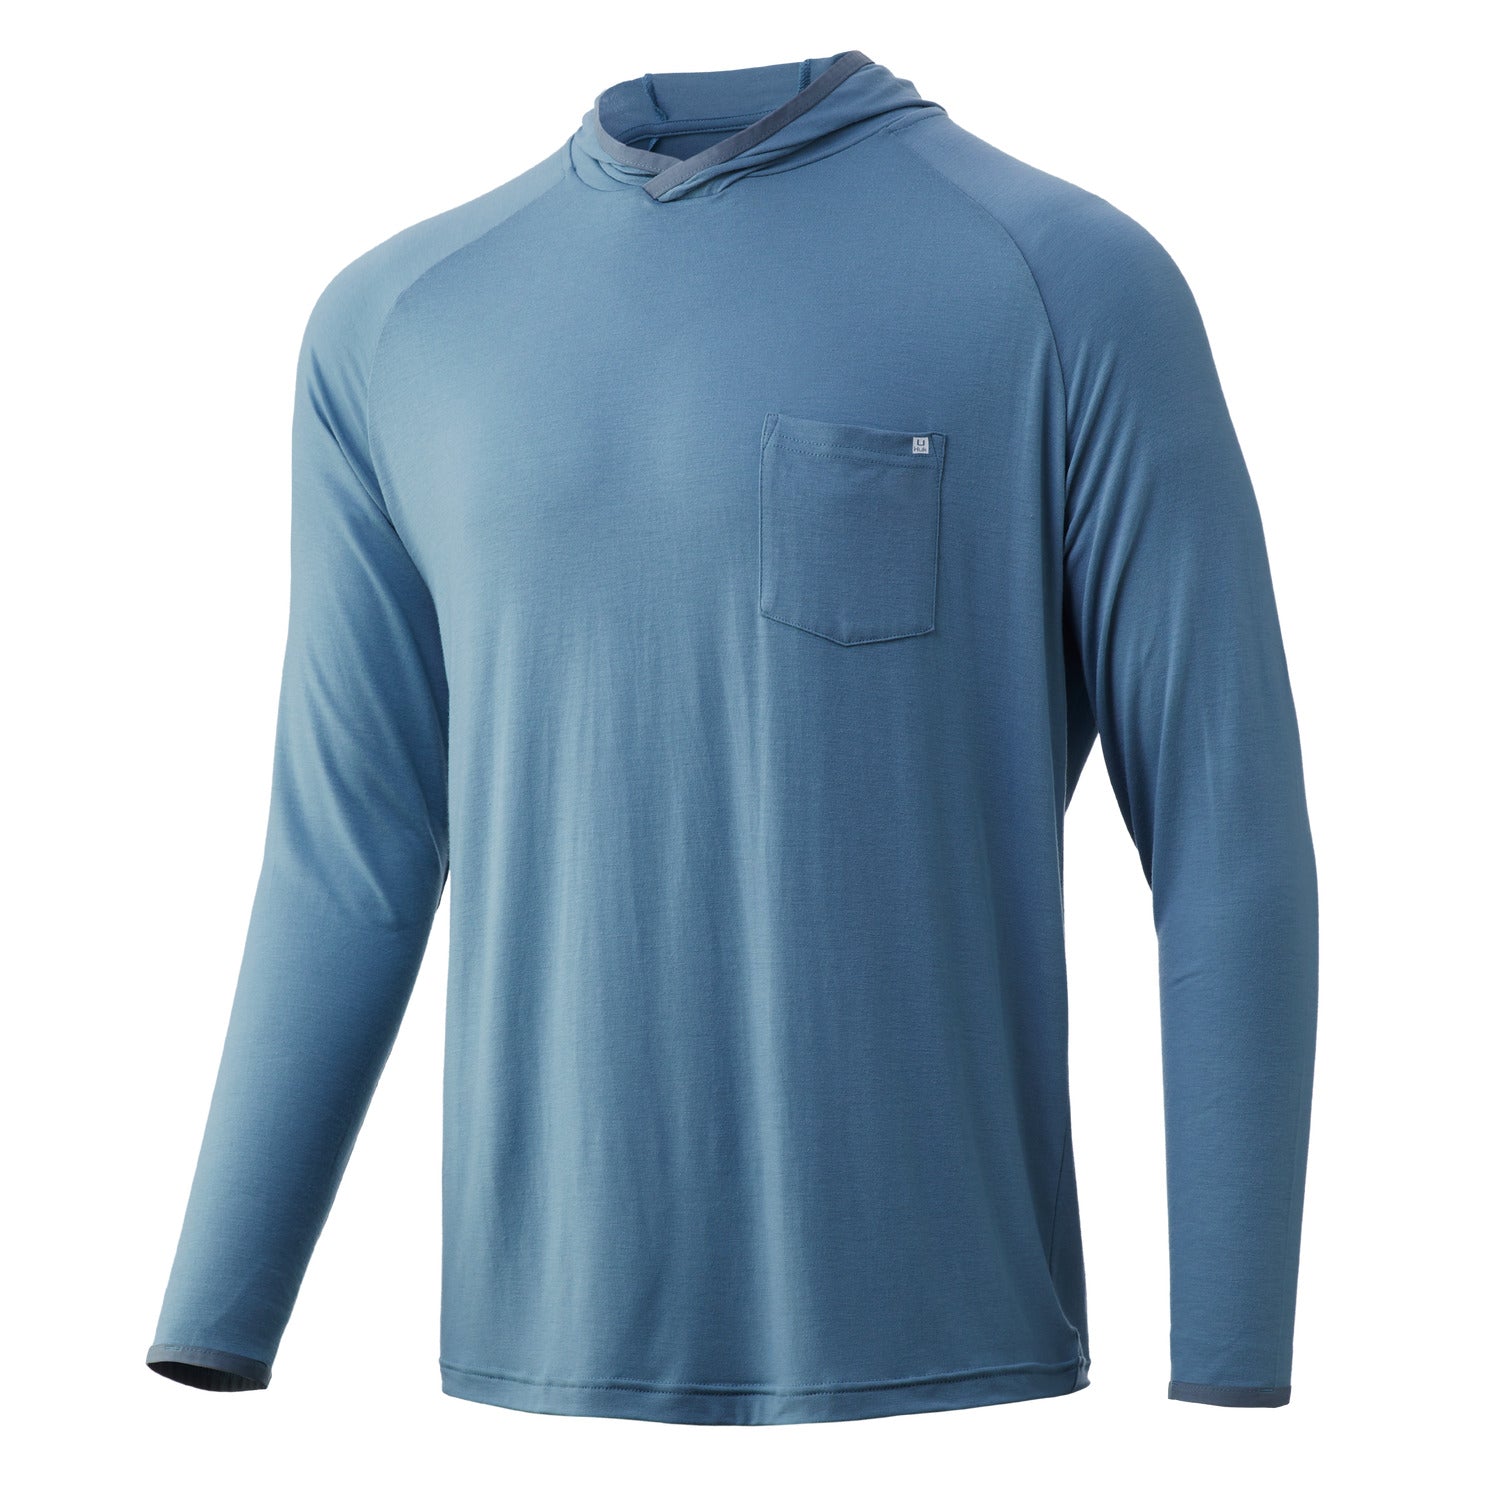 Huk Waypoint Hoodie in Silver Blue color from the front